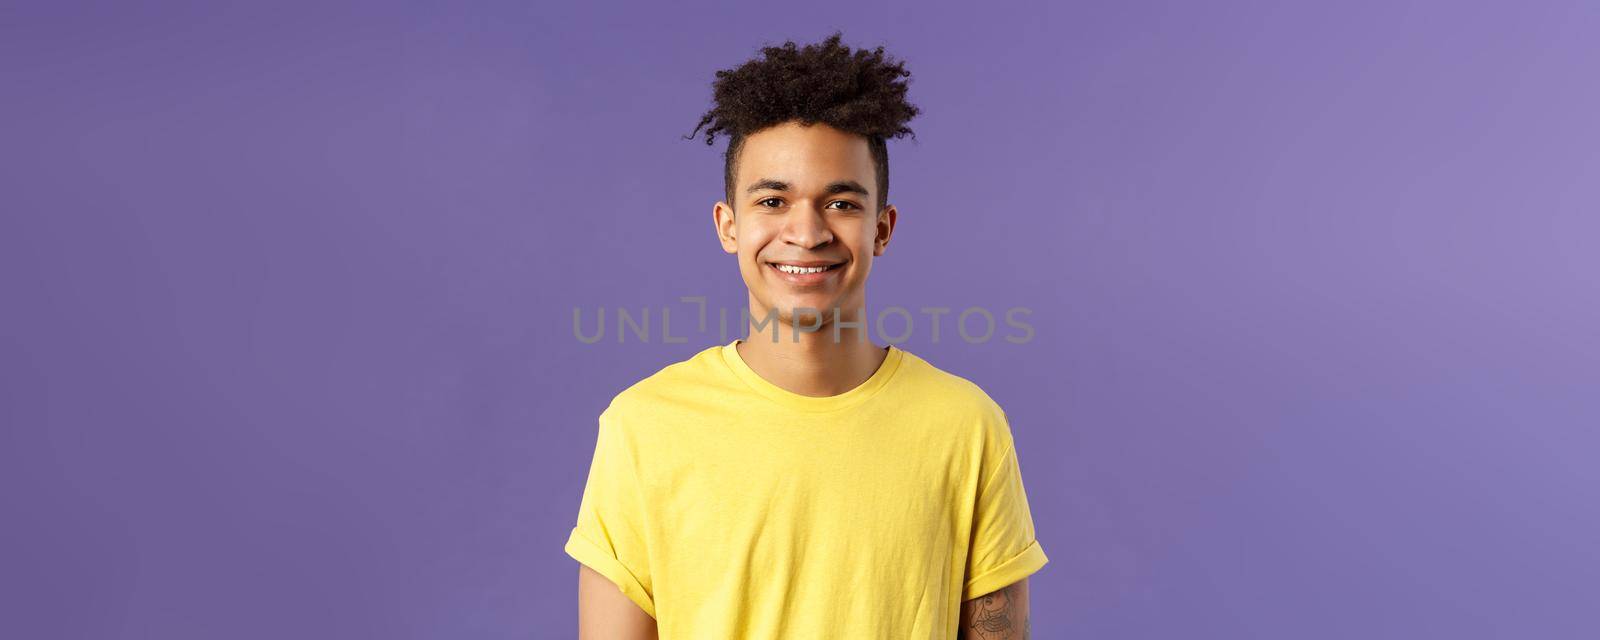 Close-up portrait of smiling, enthusiastic hispanic male student searching job, consider career opportunities, recruiting to company, smiling cheerful standing purple background.